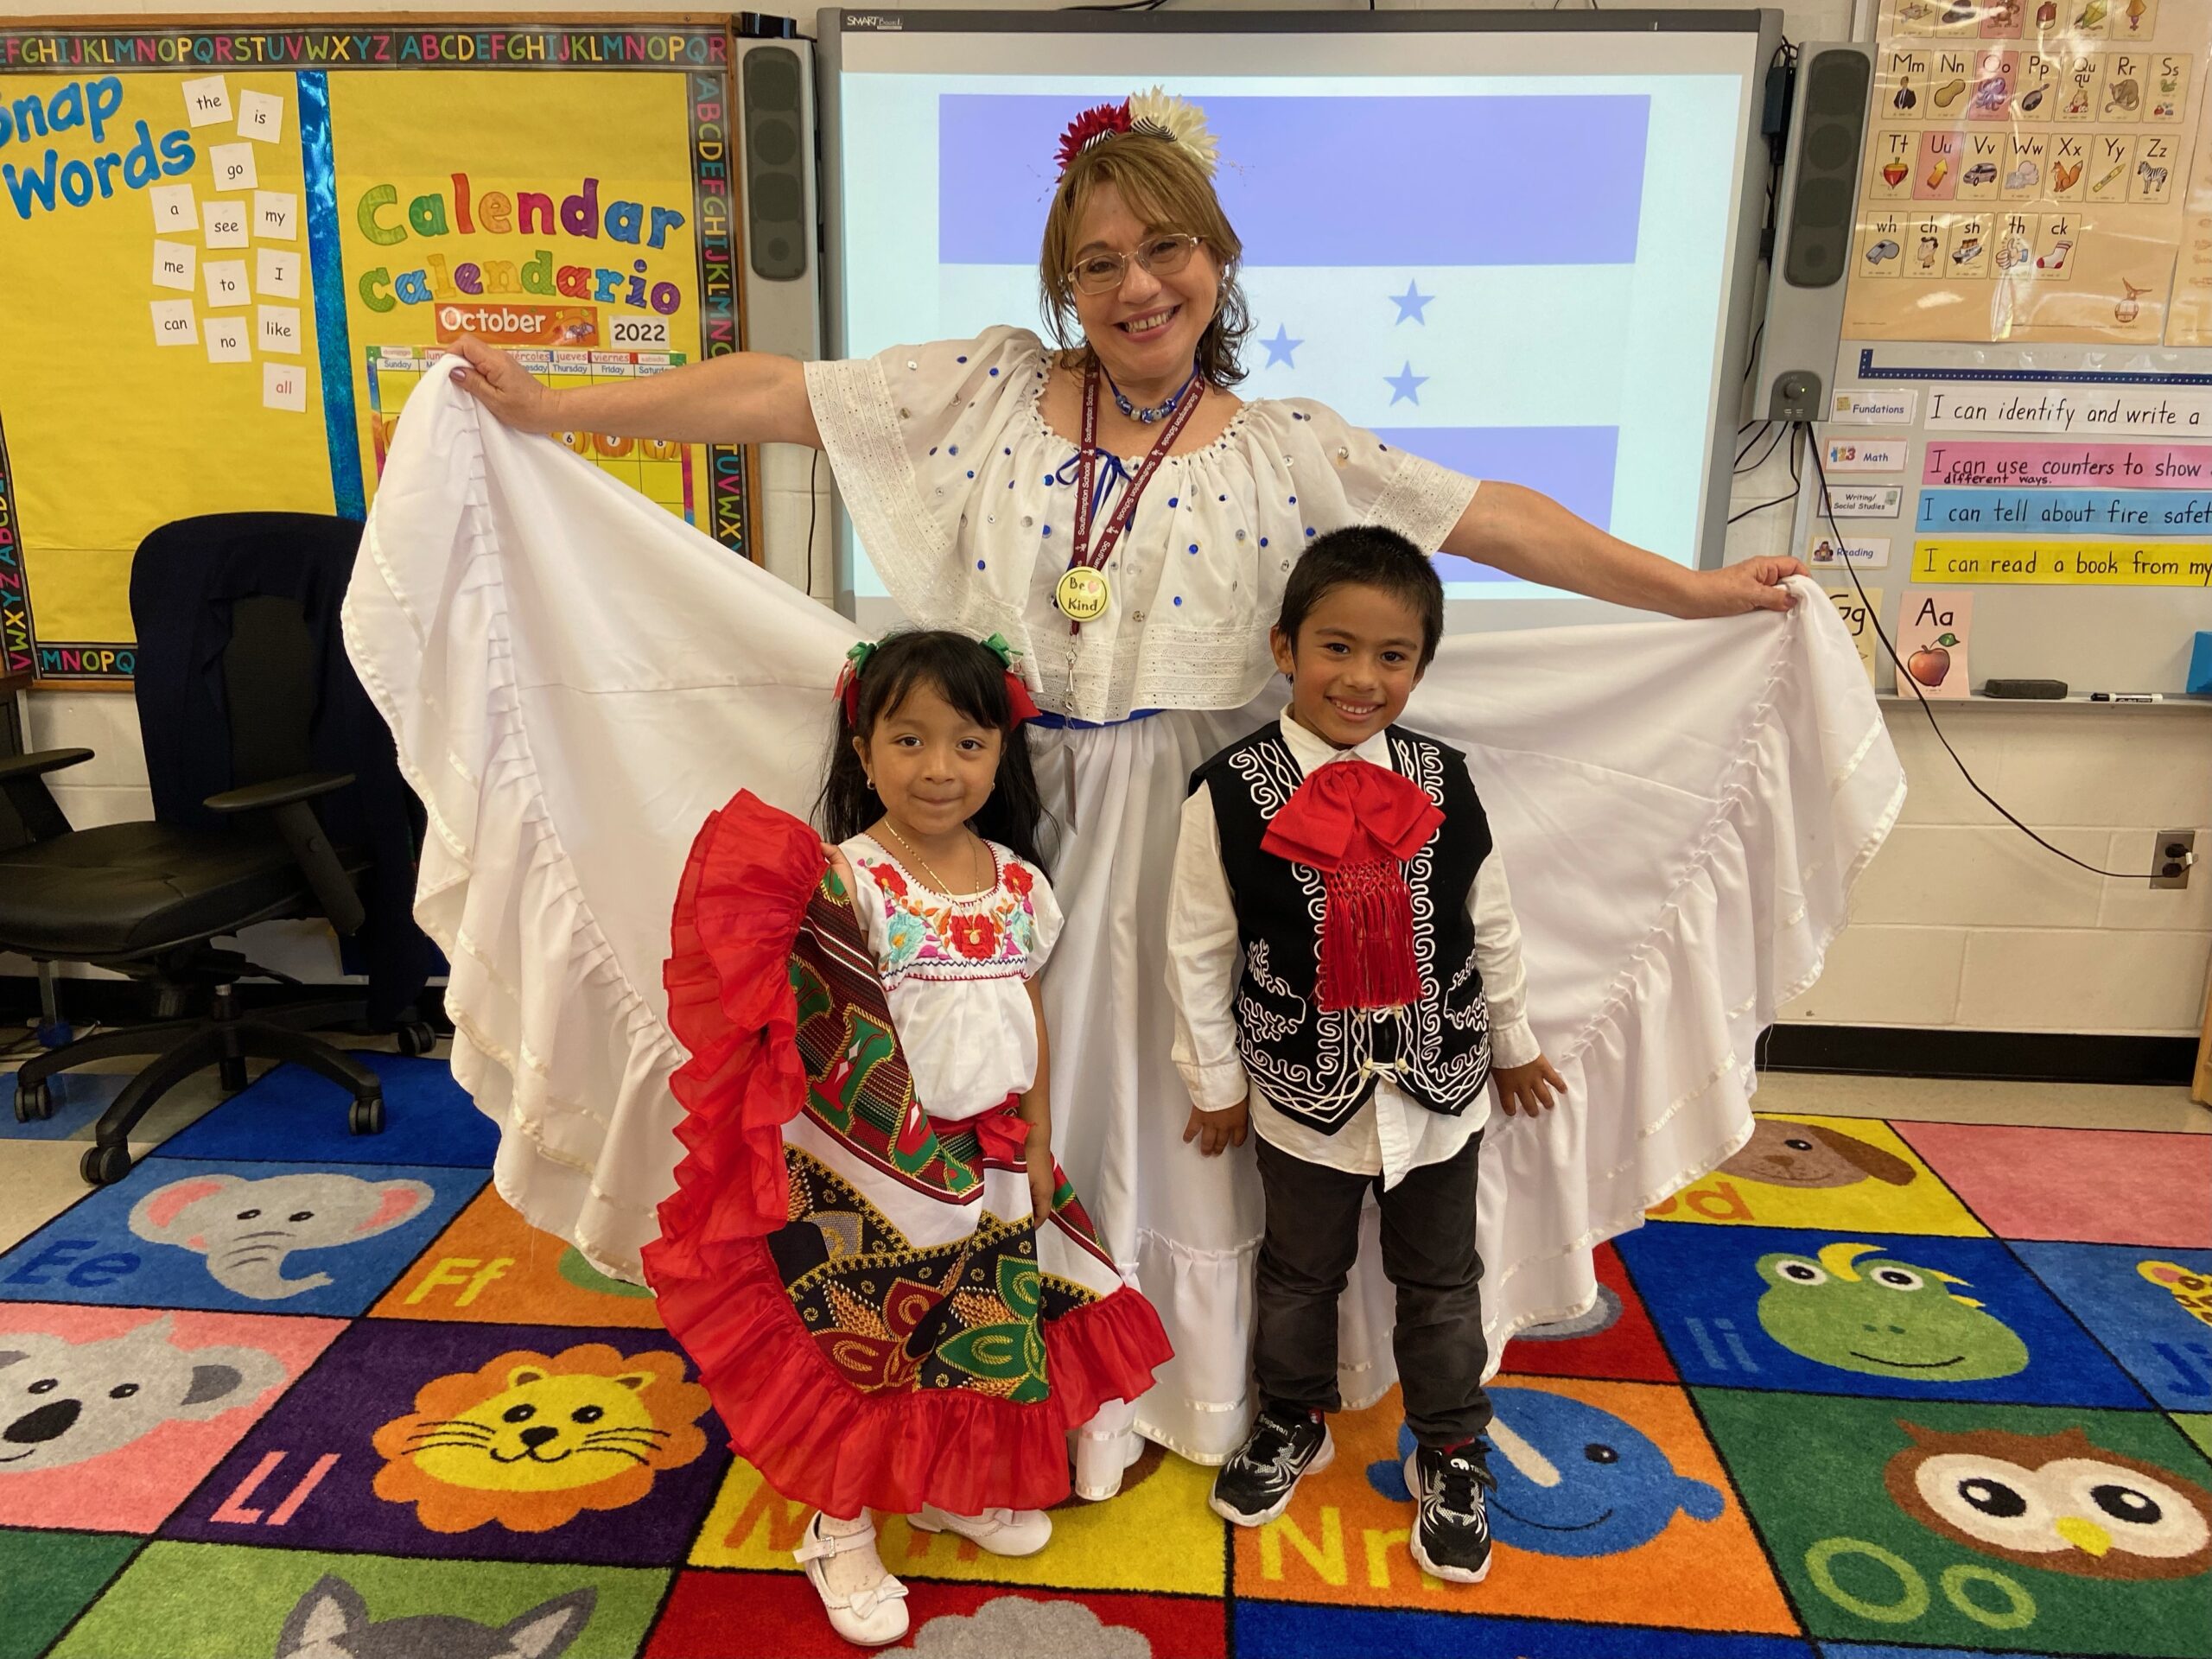 Students at Southampton Elementary School, including teacher Gina Hernandez and students Danna Rosas and Santiago Zavala Garcia, recently celebrated Hispanic Heritage Month by learning more about Hispanic cultures, Traditions and famous individuals through books, art and dancing.  COURTESY SOUTHAMPTON SCHOOL DISTRICT